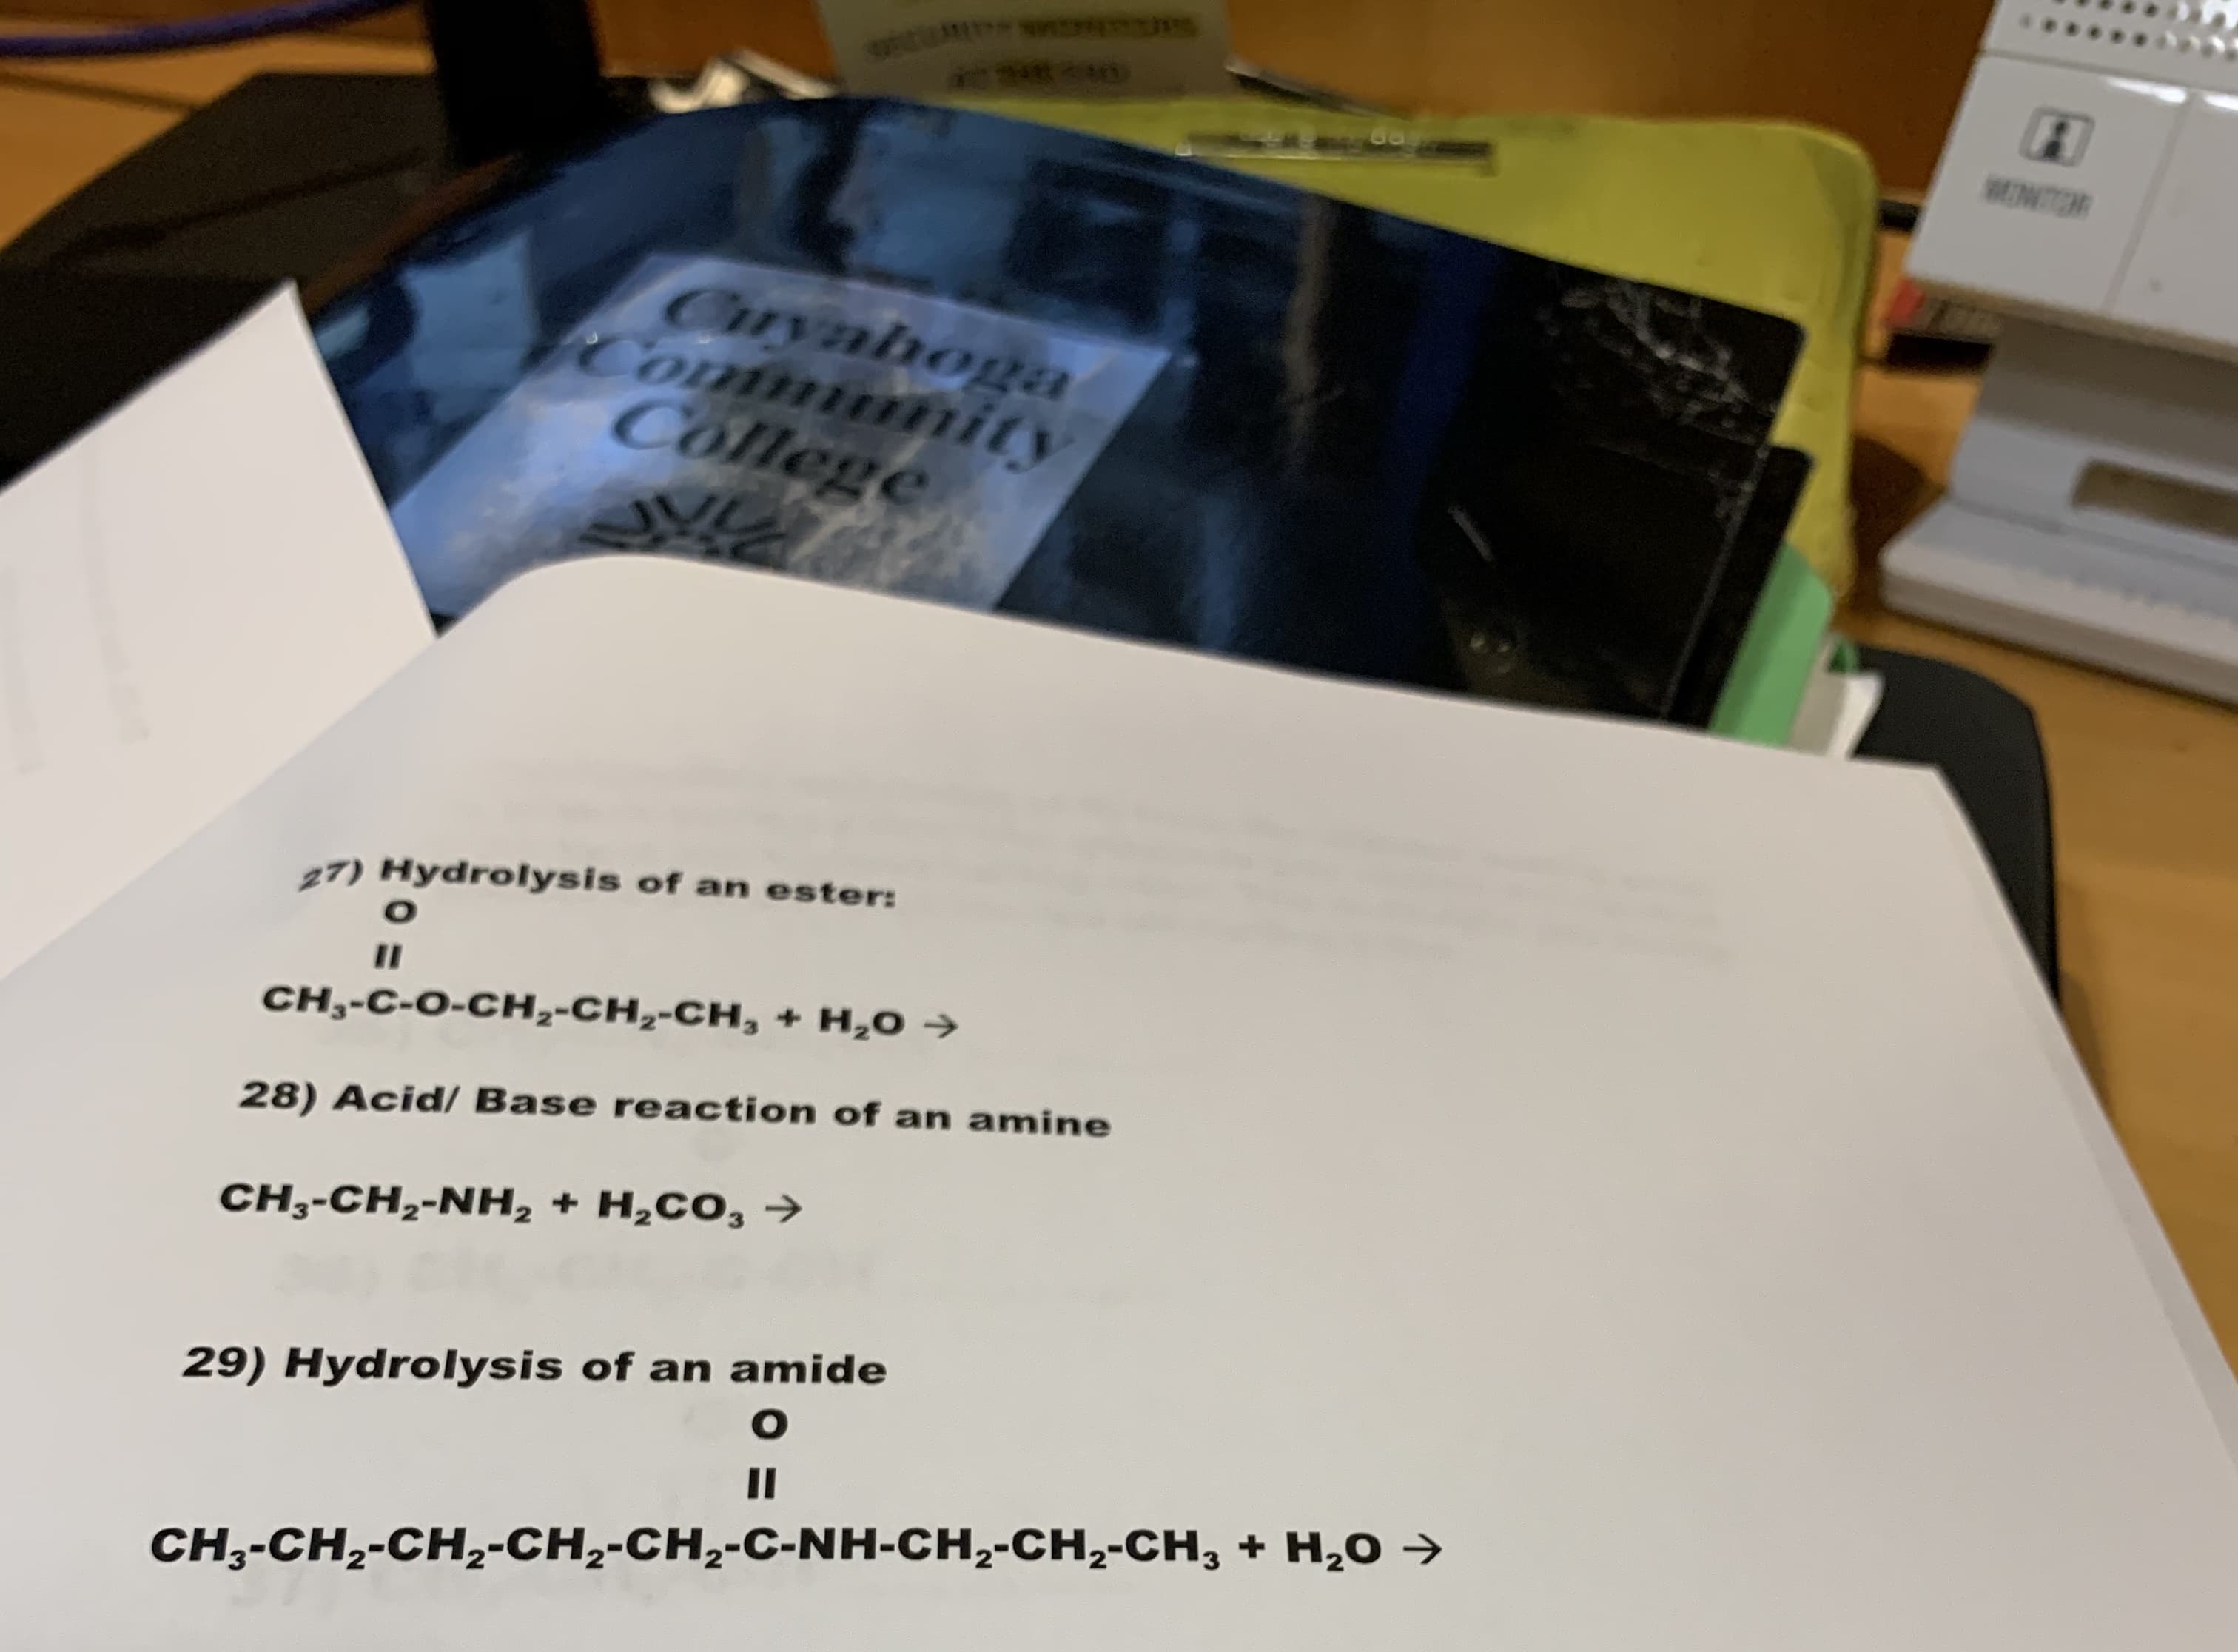 MONTR
Cryahoga
Commnity
College
27) Hydrolysis of an ester:
O
II
CH,-C-O-CH,-CH,-CH,+ H,O
28) Acid/ Base reaction of an amine
CH3-CH2-NH, + H2CO3
29) Hydrolysis of an amide
O
II
CH3-CH2-CH2-CH2-CH2-C-NH-CH2-CH2-CH, + H20
